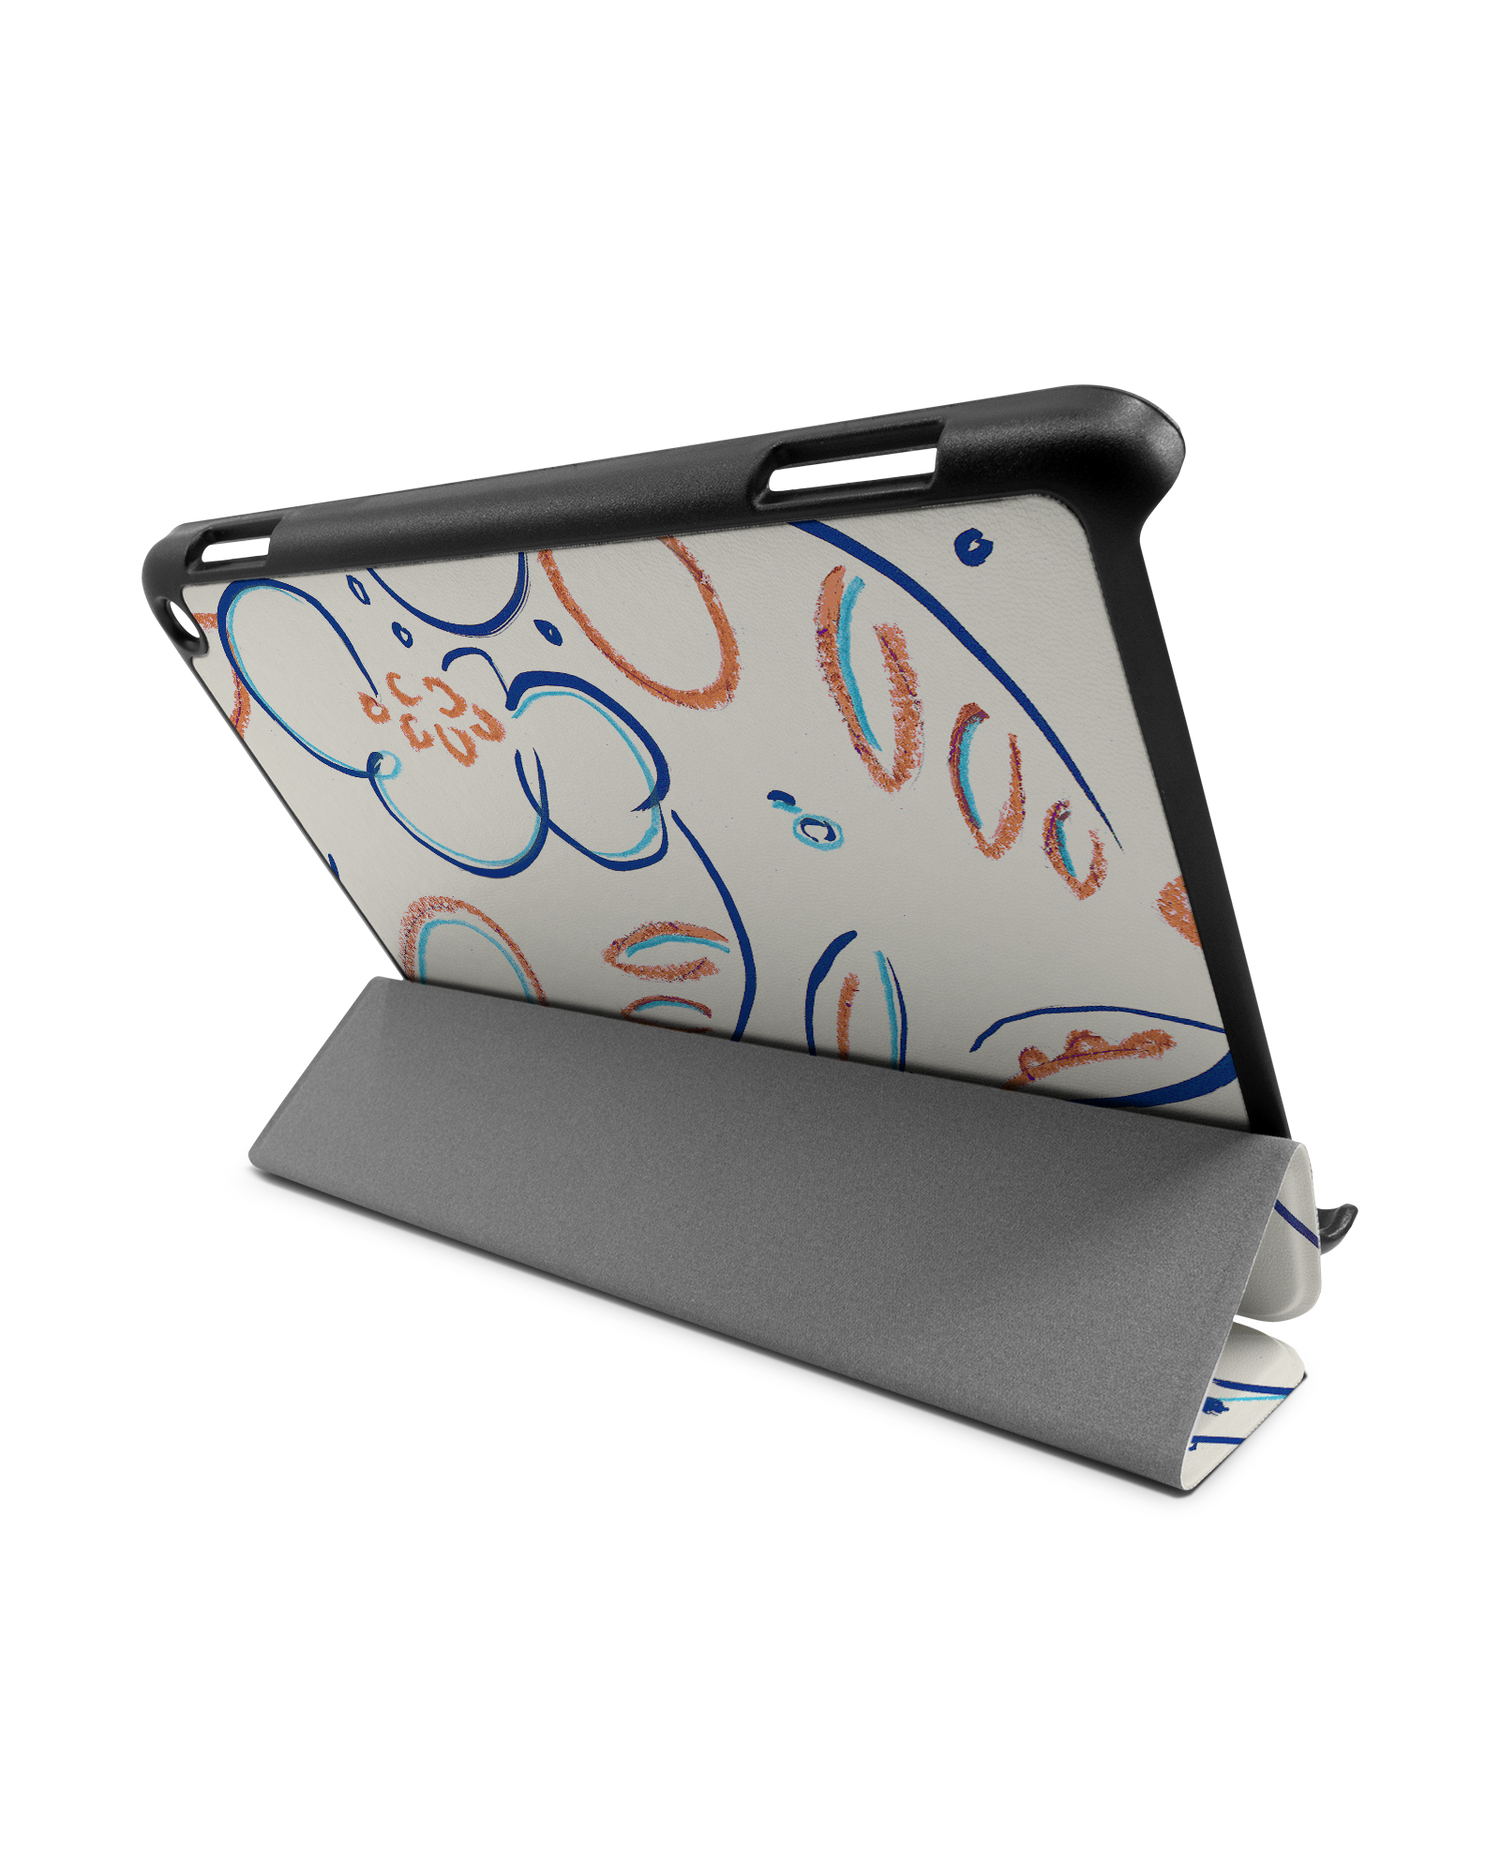 Bloom Doodles Tablet Smart Case for Amazon Fire HD 8 (2022), Amazon Fire HD 8 Plus (2022), Amazon Fire HD 8 (2020), Amazon Fire HD 8 Plus (2020): Used as Stand